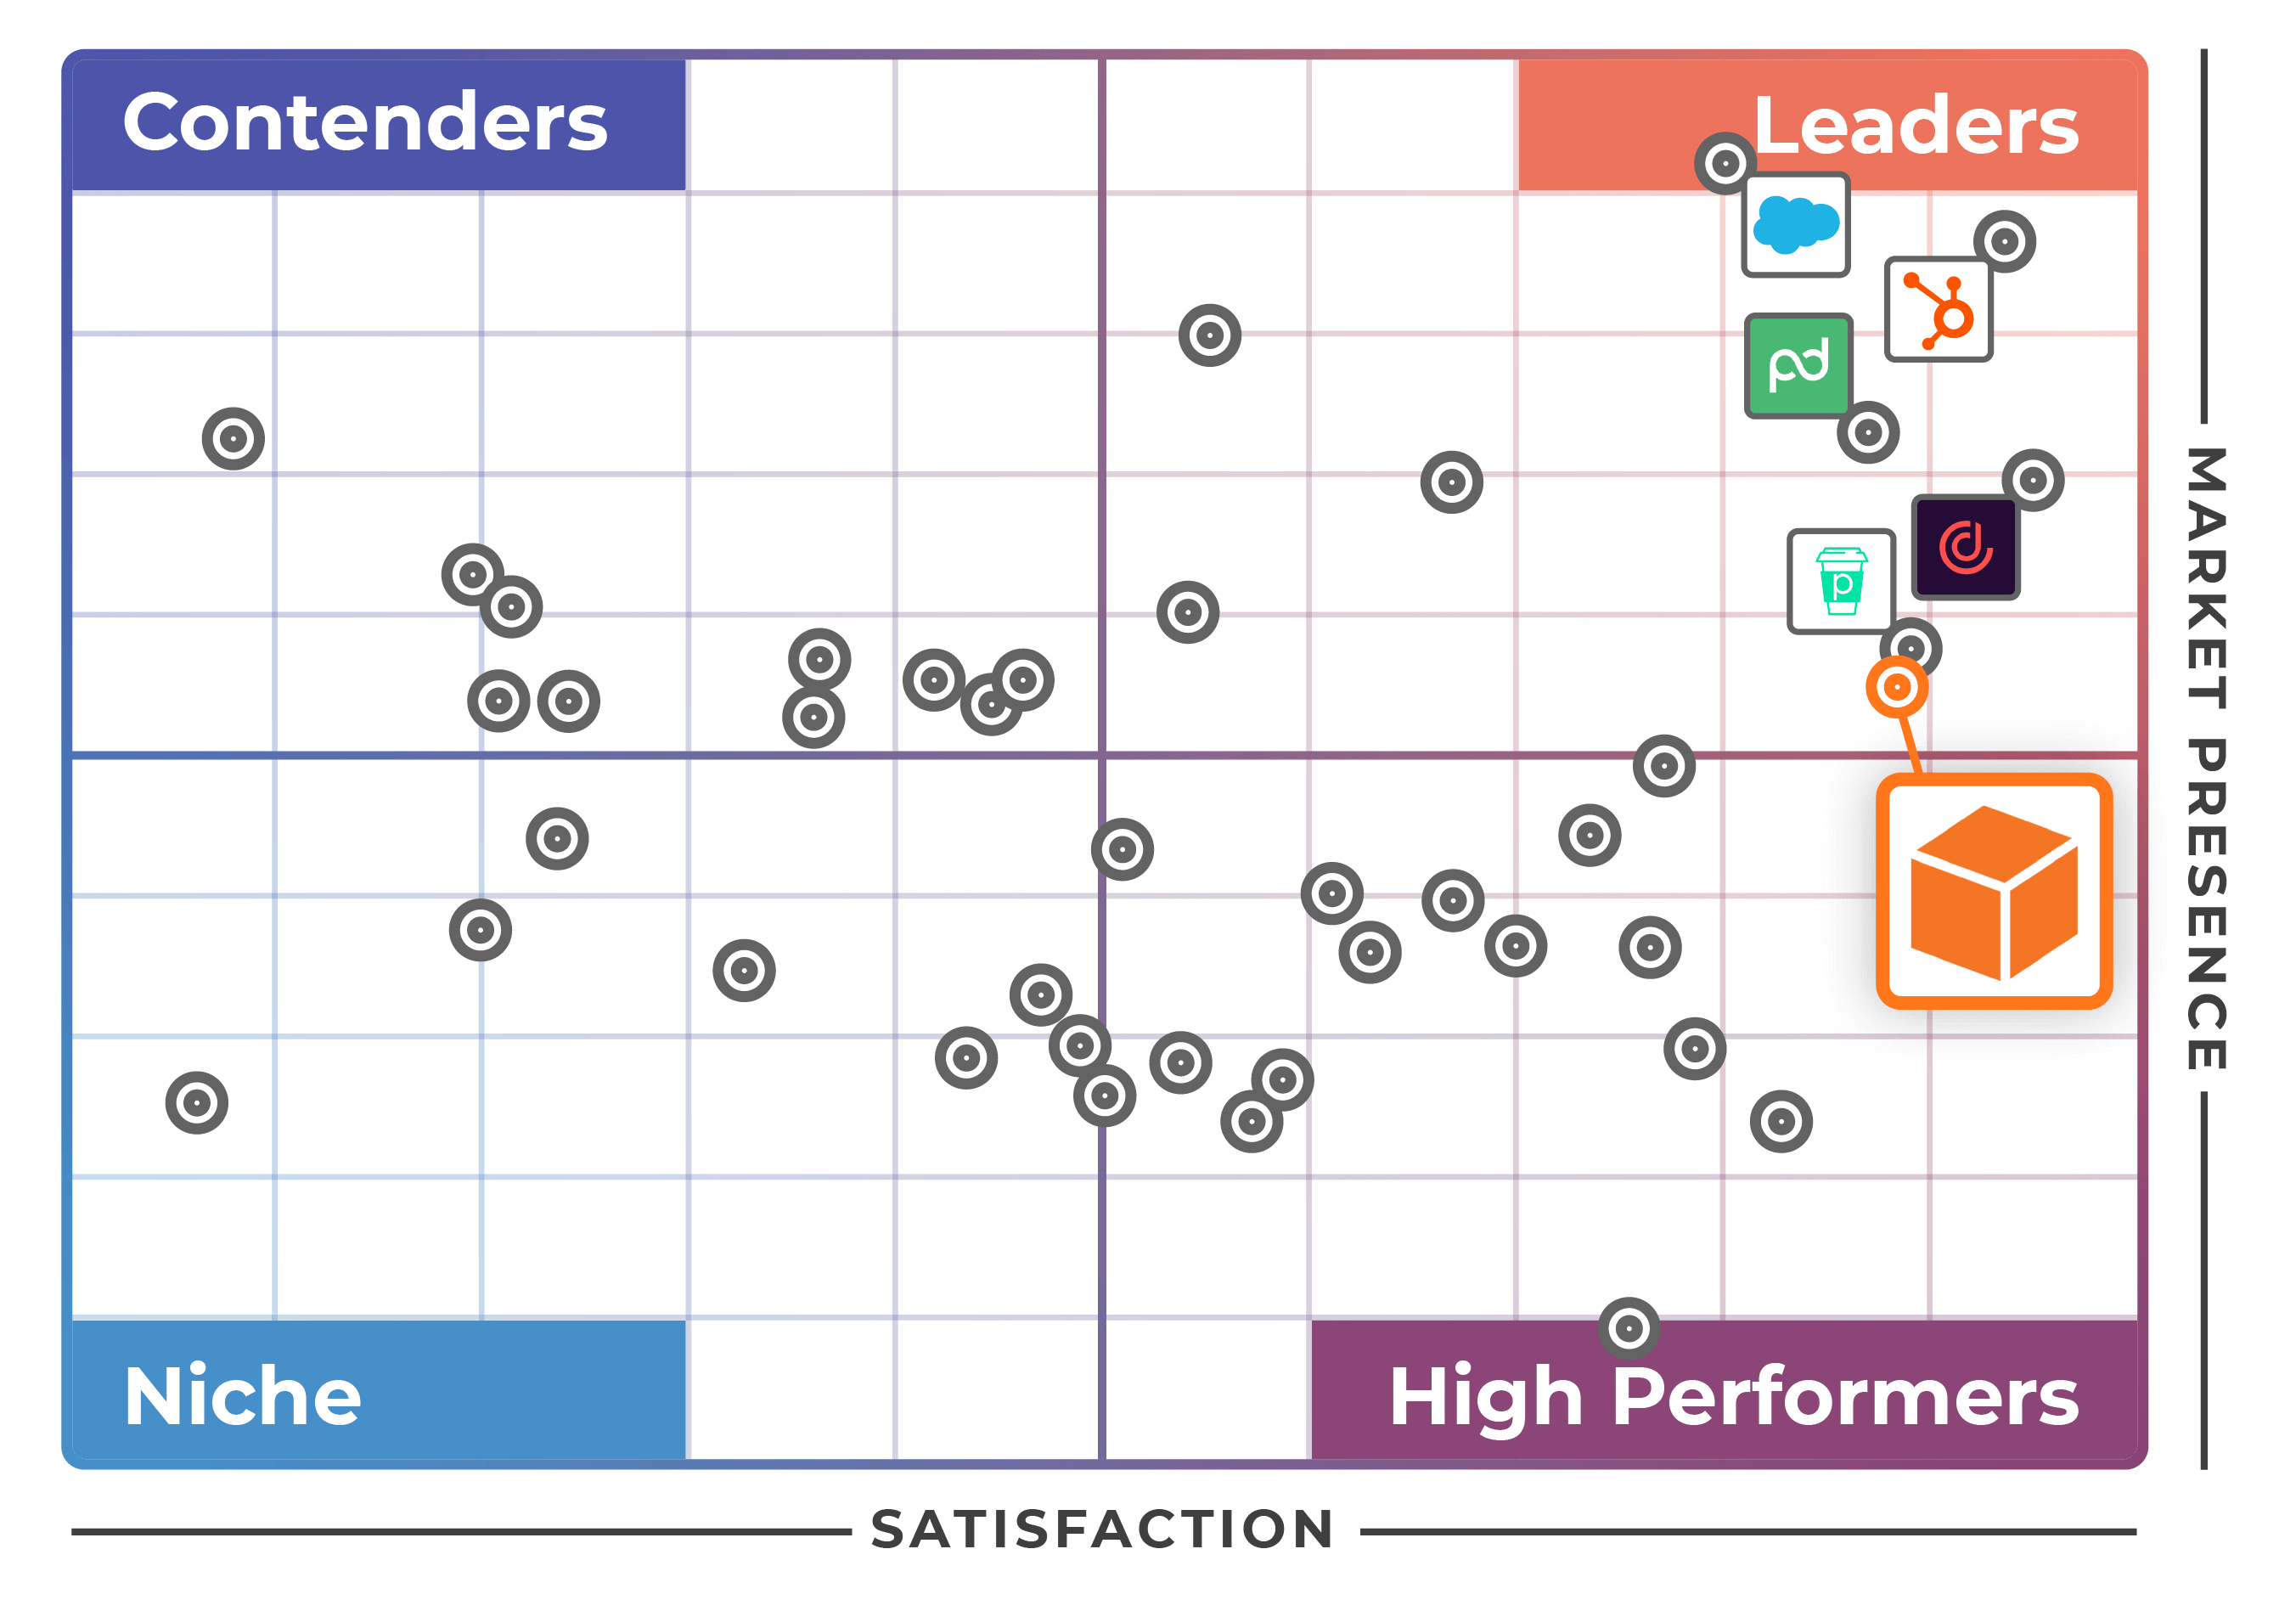 Paperless Parts Ranked a Leader in Quoting Software